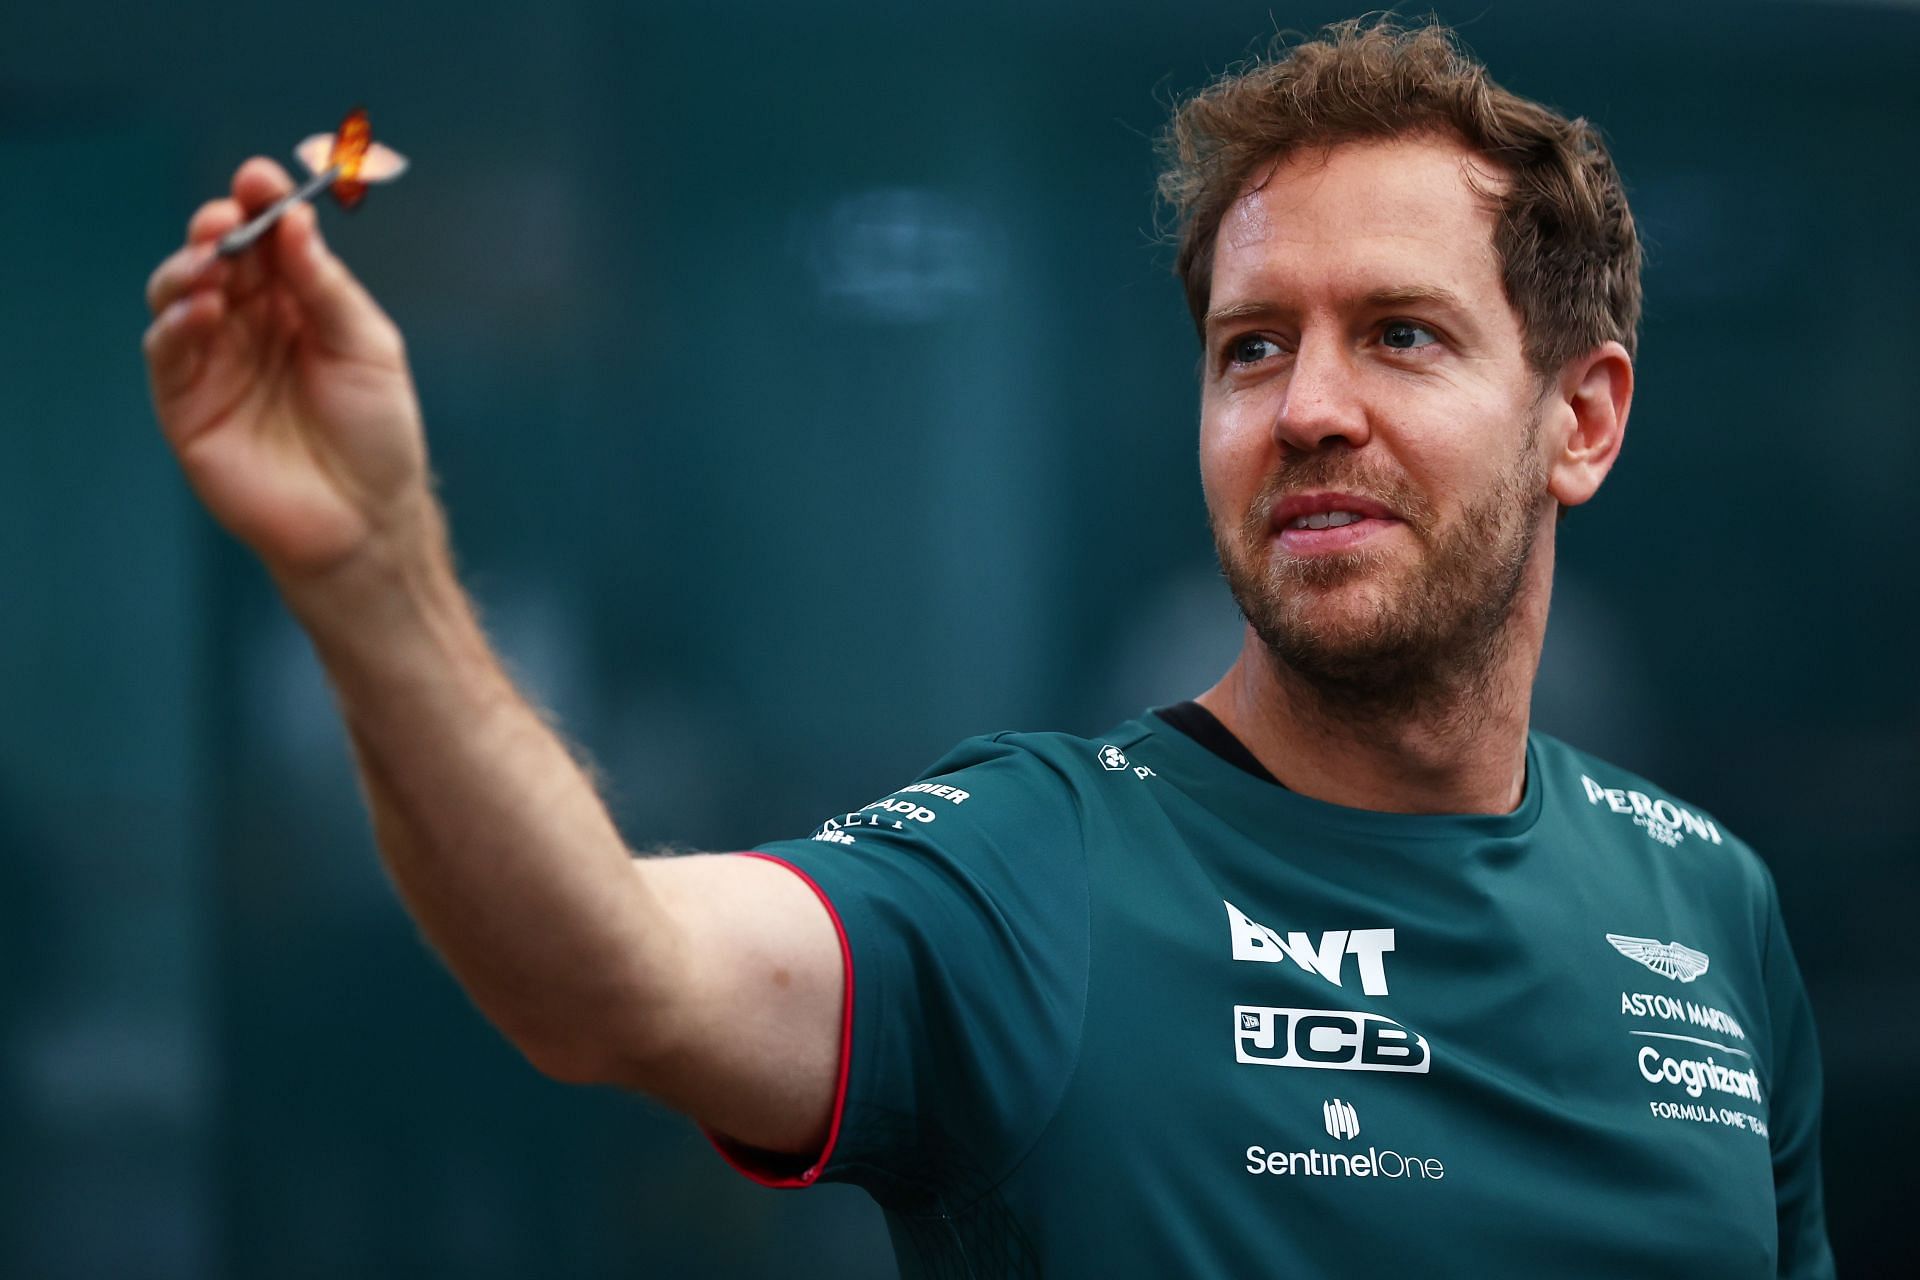 Sebastian Vettel might be driving in F1 for the last time in his career